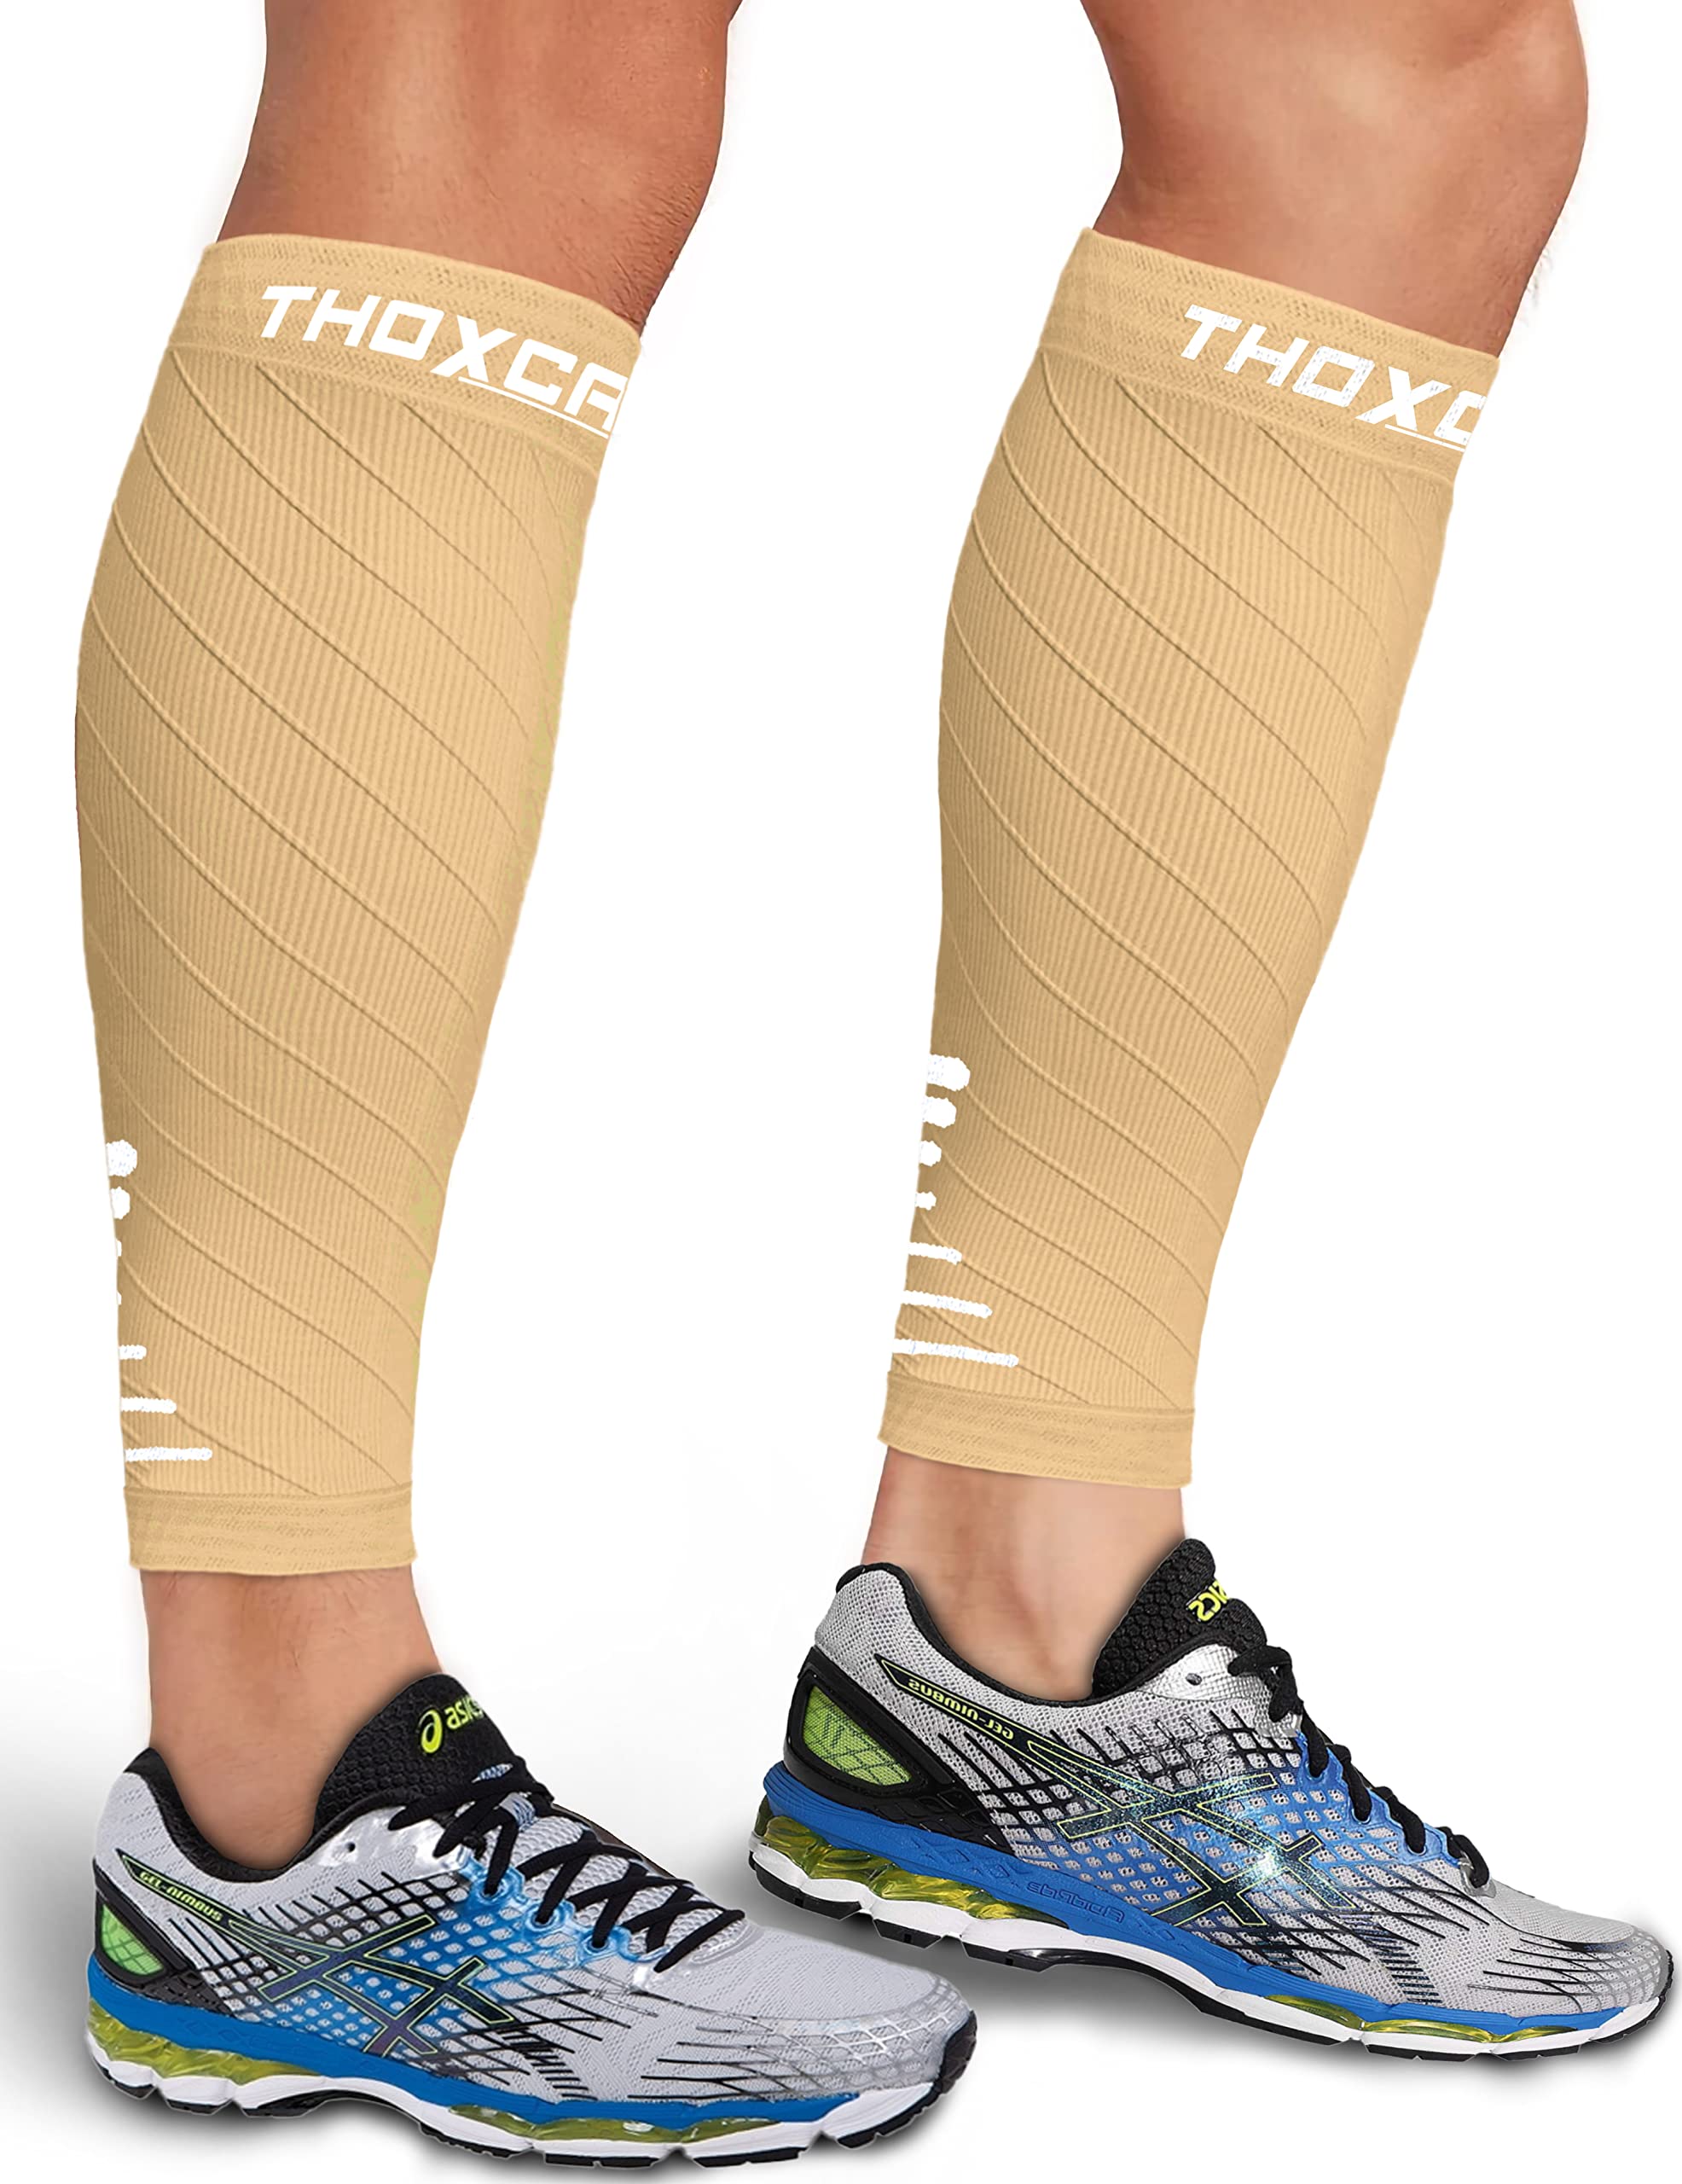  Thoxcare Calf Compression Sleeve for Men Women (1 Pair